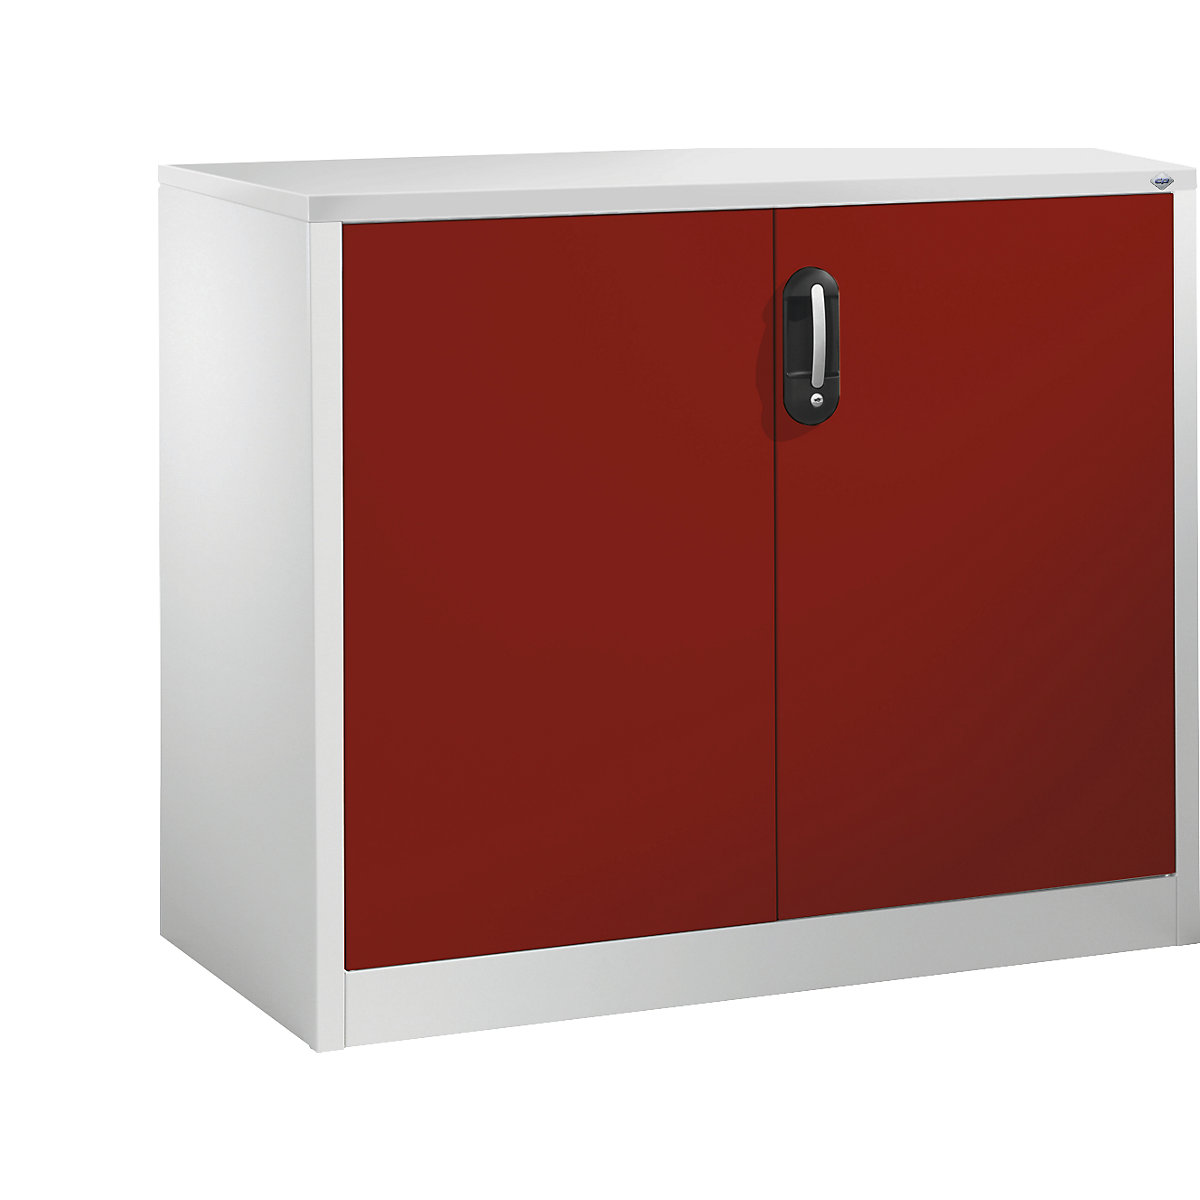 ACURADO filing sideboard – C+P, 2 file heights, HxWxD 1000 x 1200 x 500 mm, light grey / ruby red-17